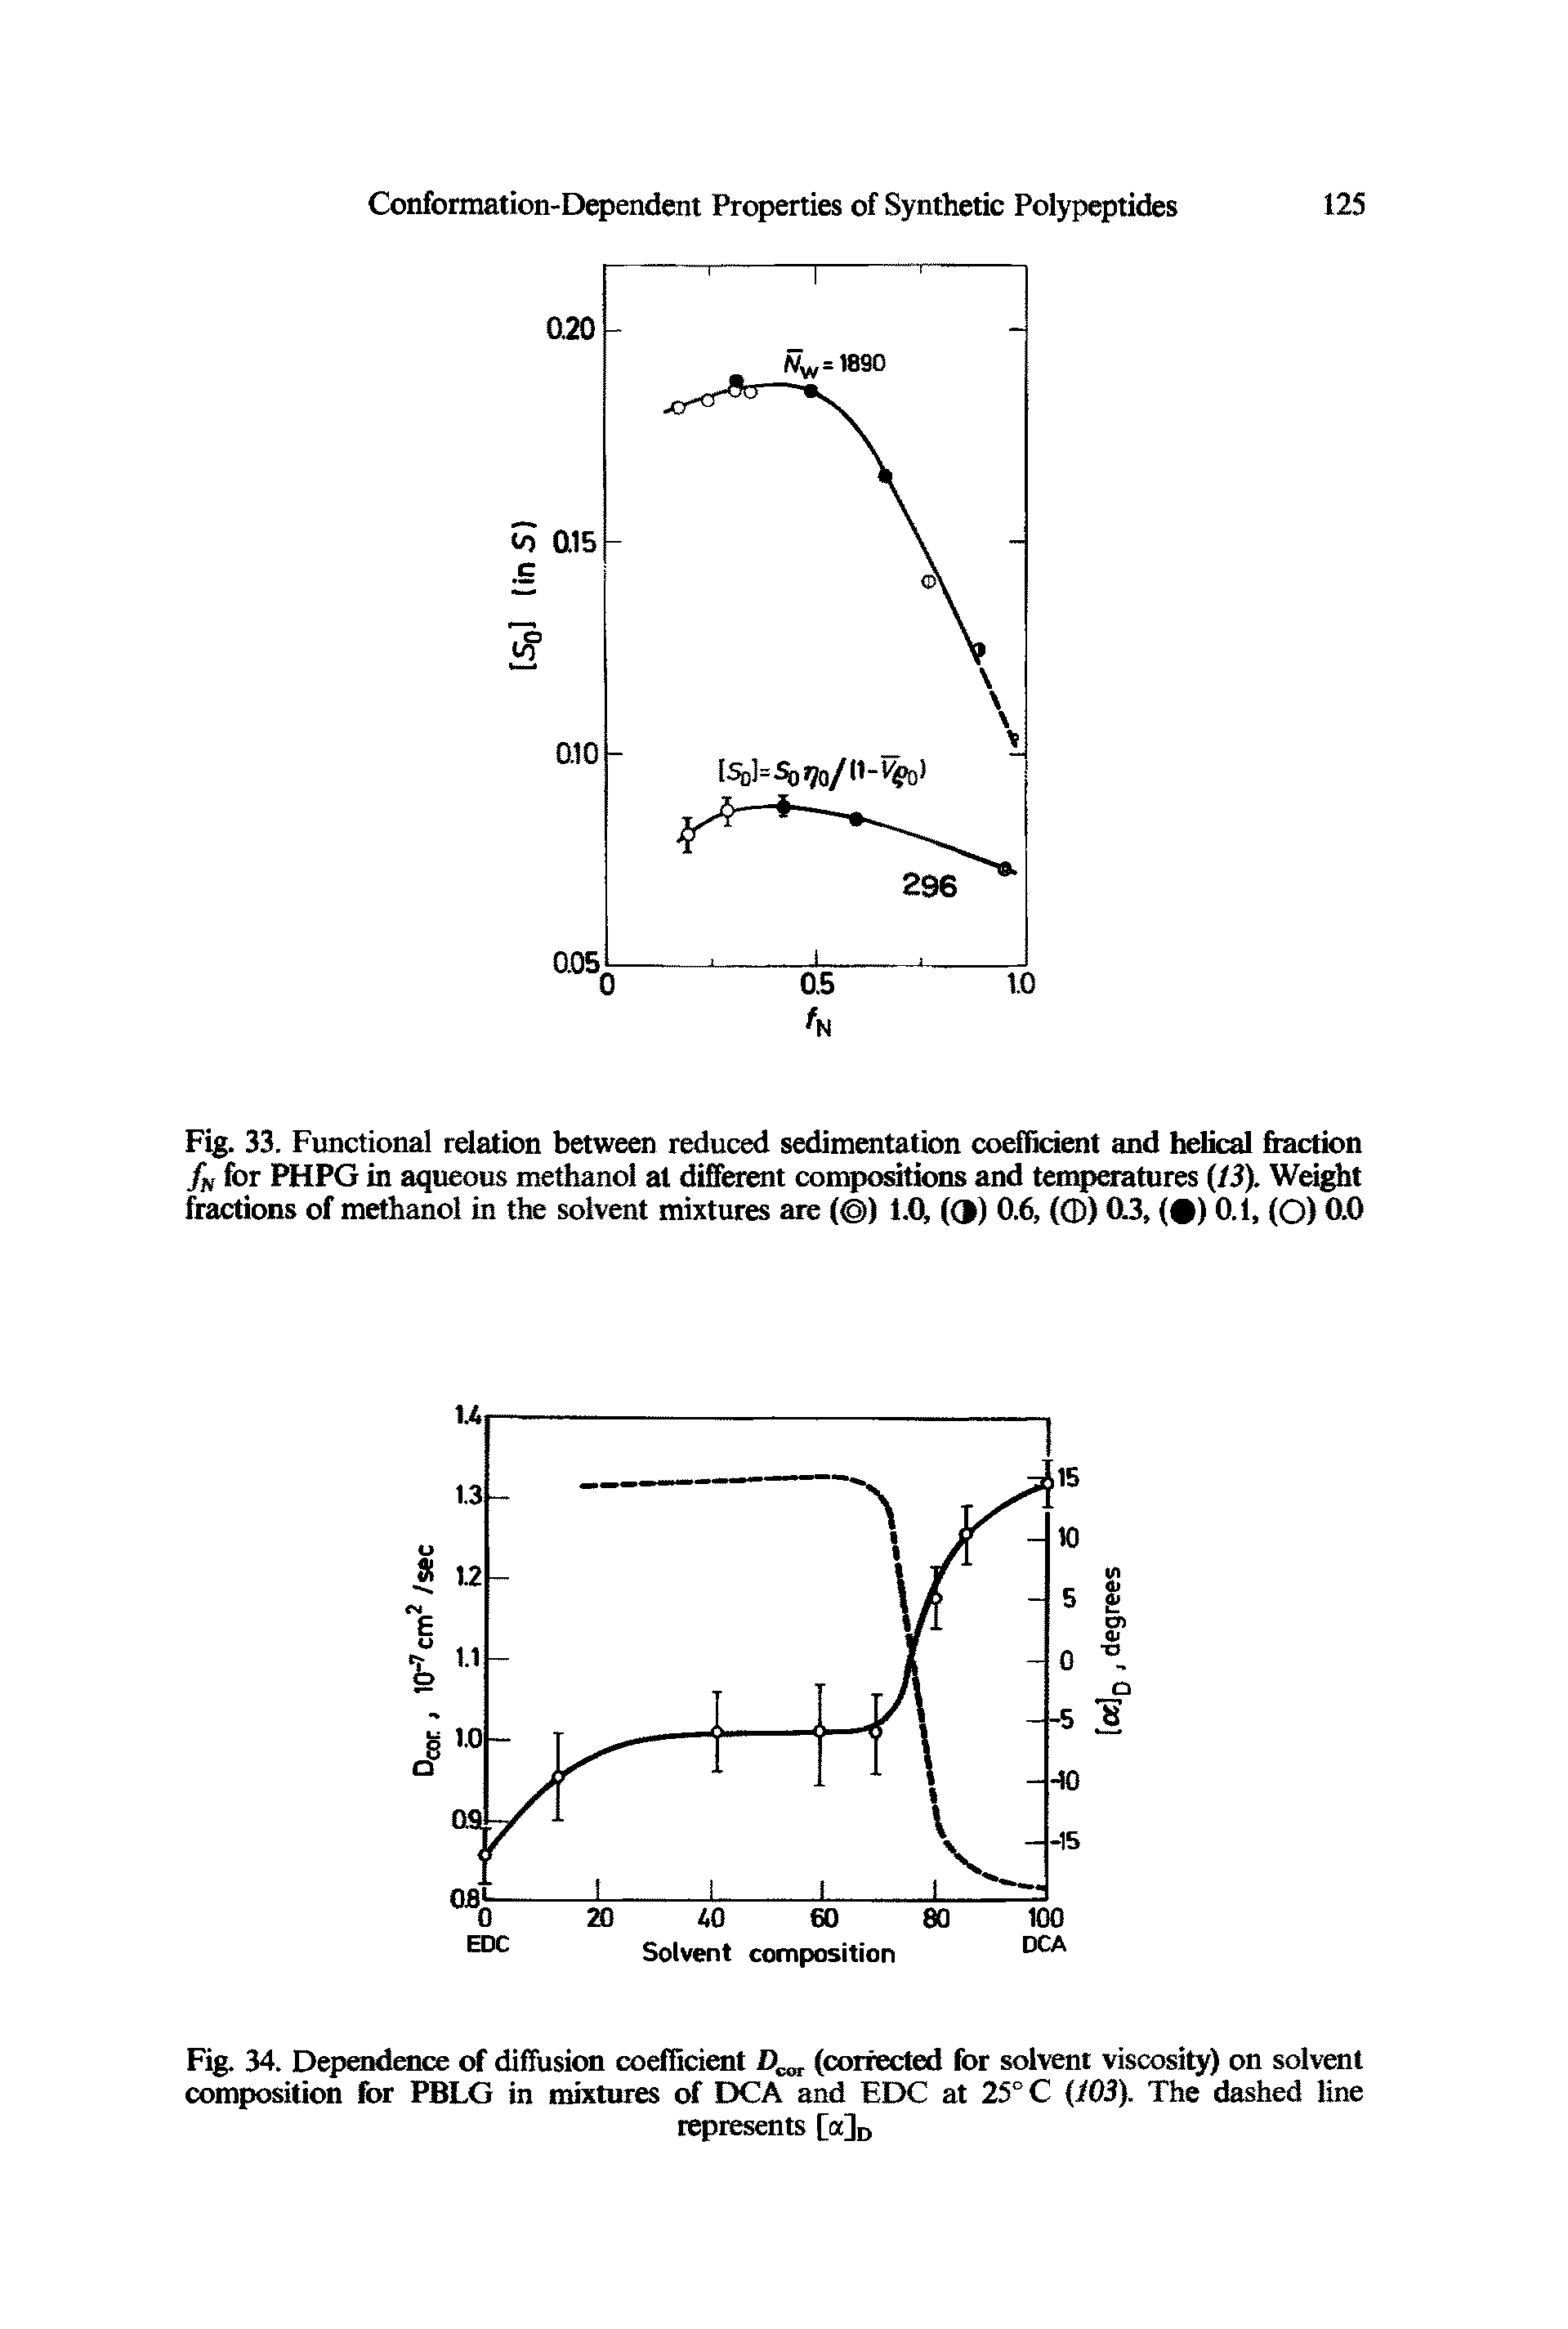 Fig. 33. Functional relation between reduced sedimentation coefficient and helical fraction fN for PHPG in aqueous methanol at different compositions and temperatures (13). Weight fractions of methanol in the solvent mixtures are ( ) 1.0, J) 0.6, (0) 0.3, ( ) 0.1, (O) 0.0...